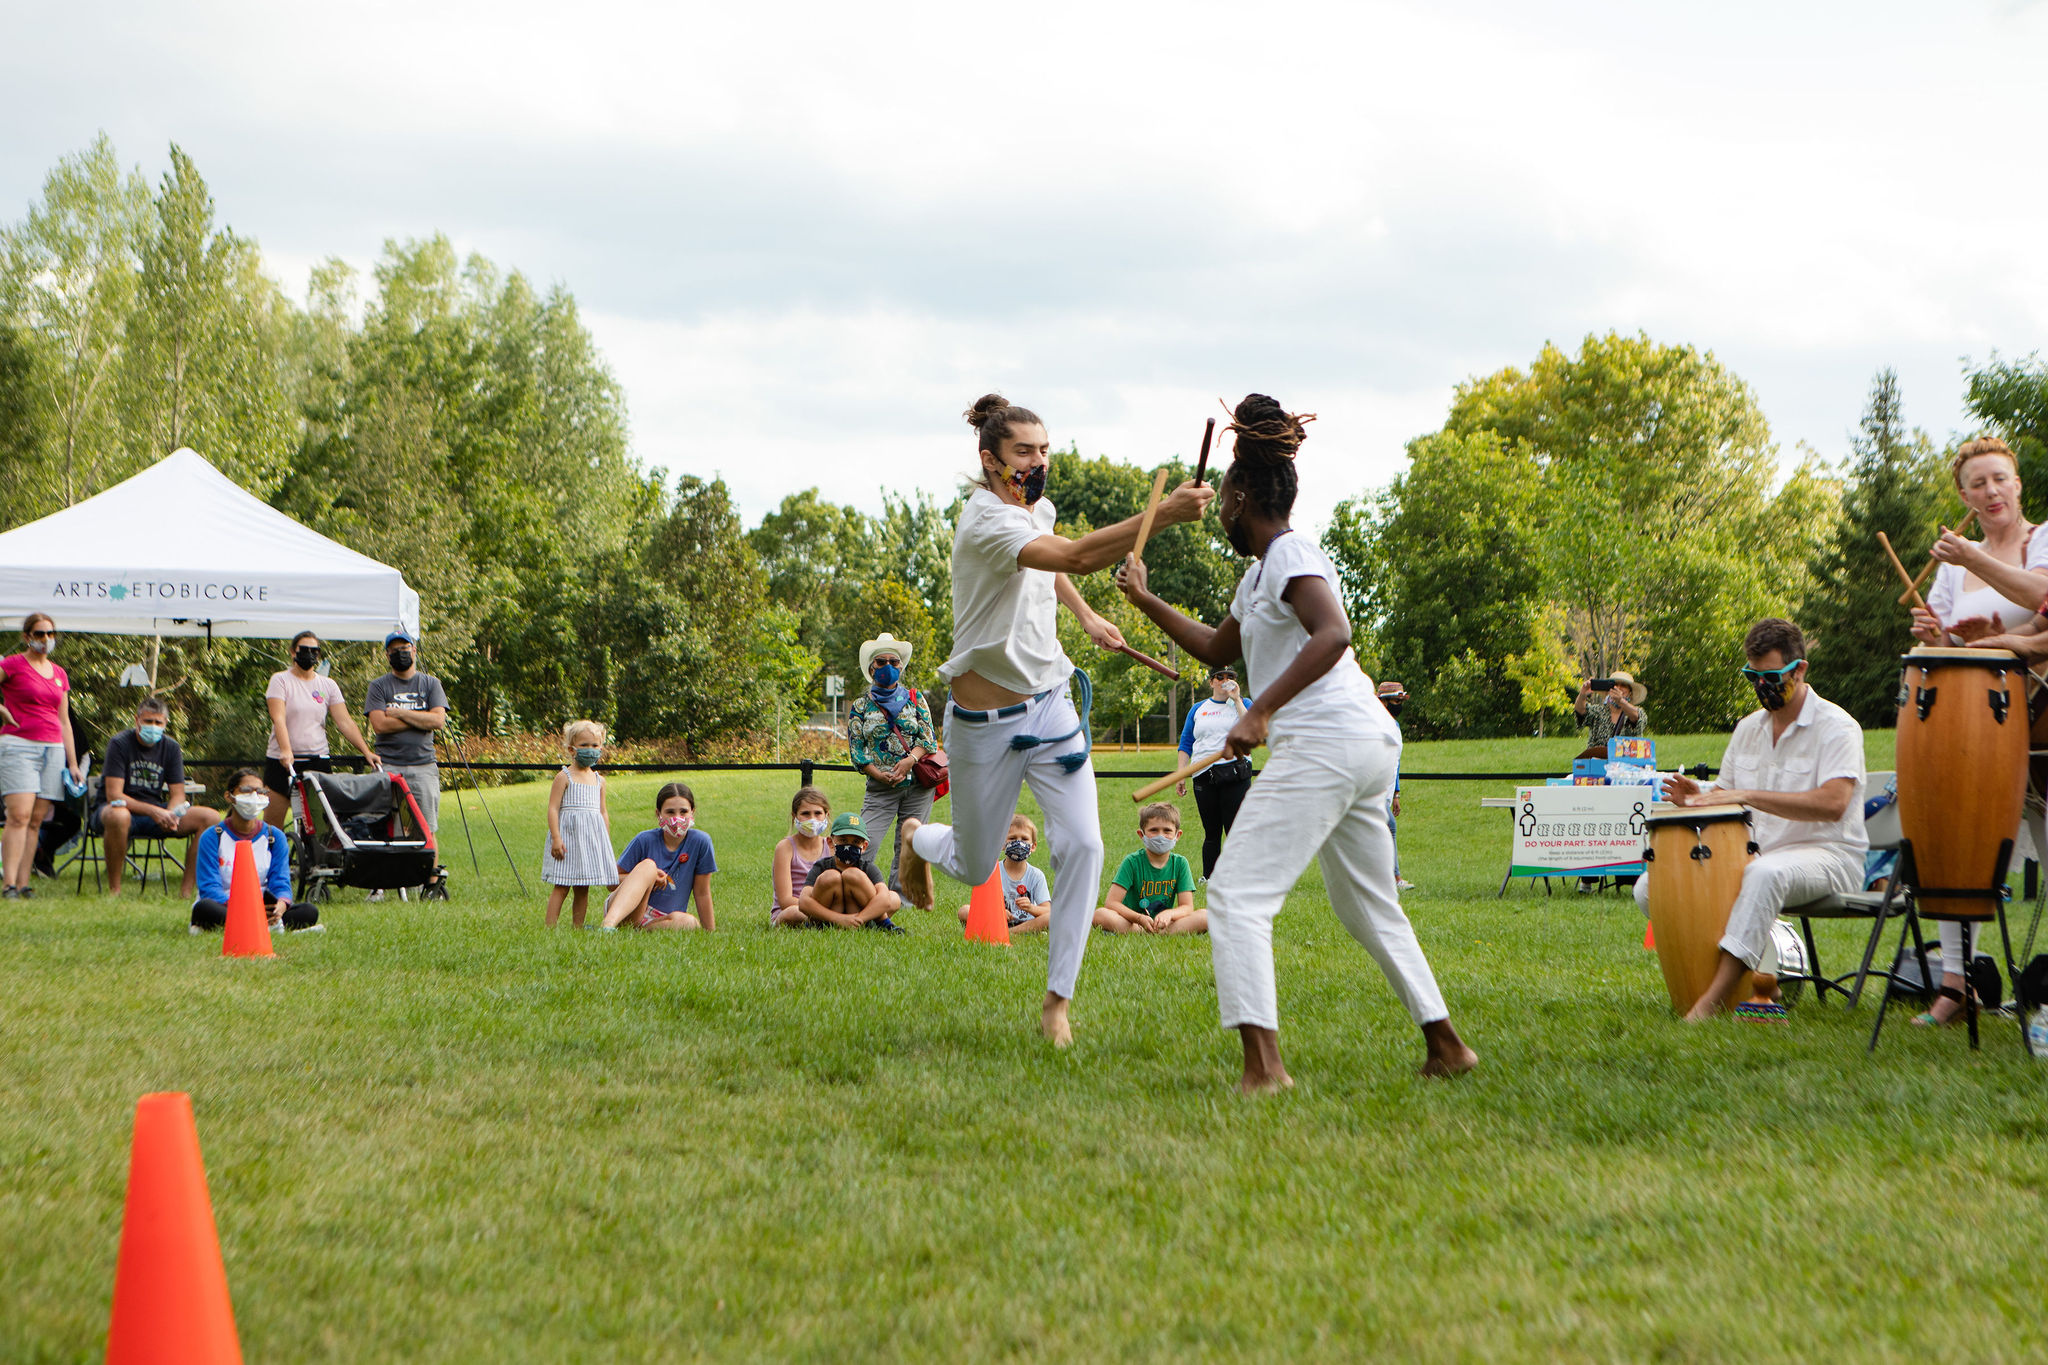 A man and woman, both in white dance together in a field while audience members watch.